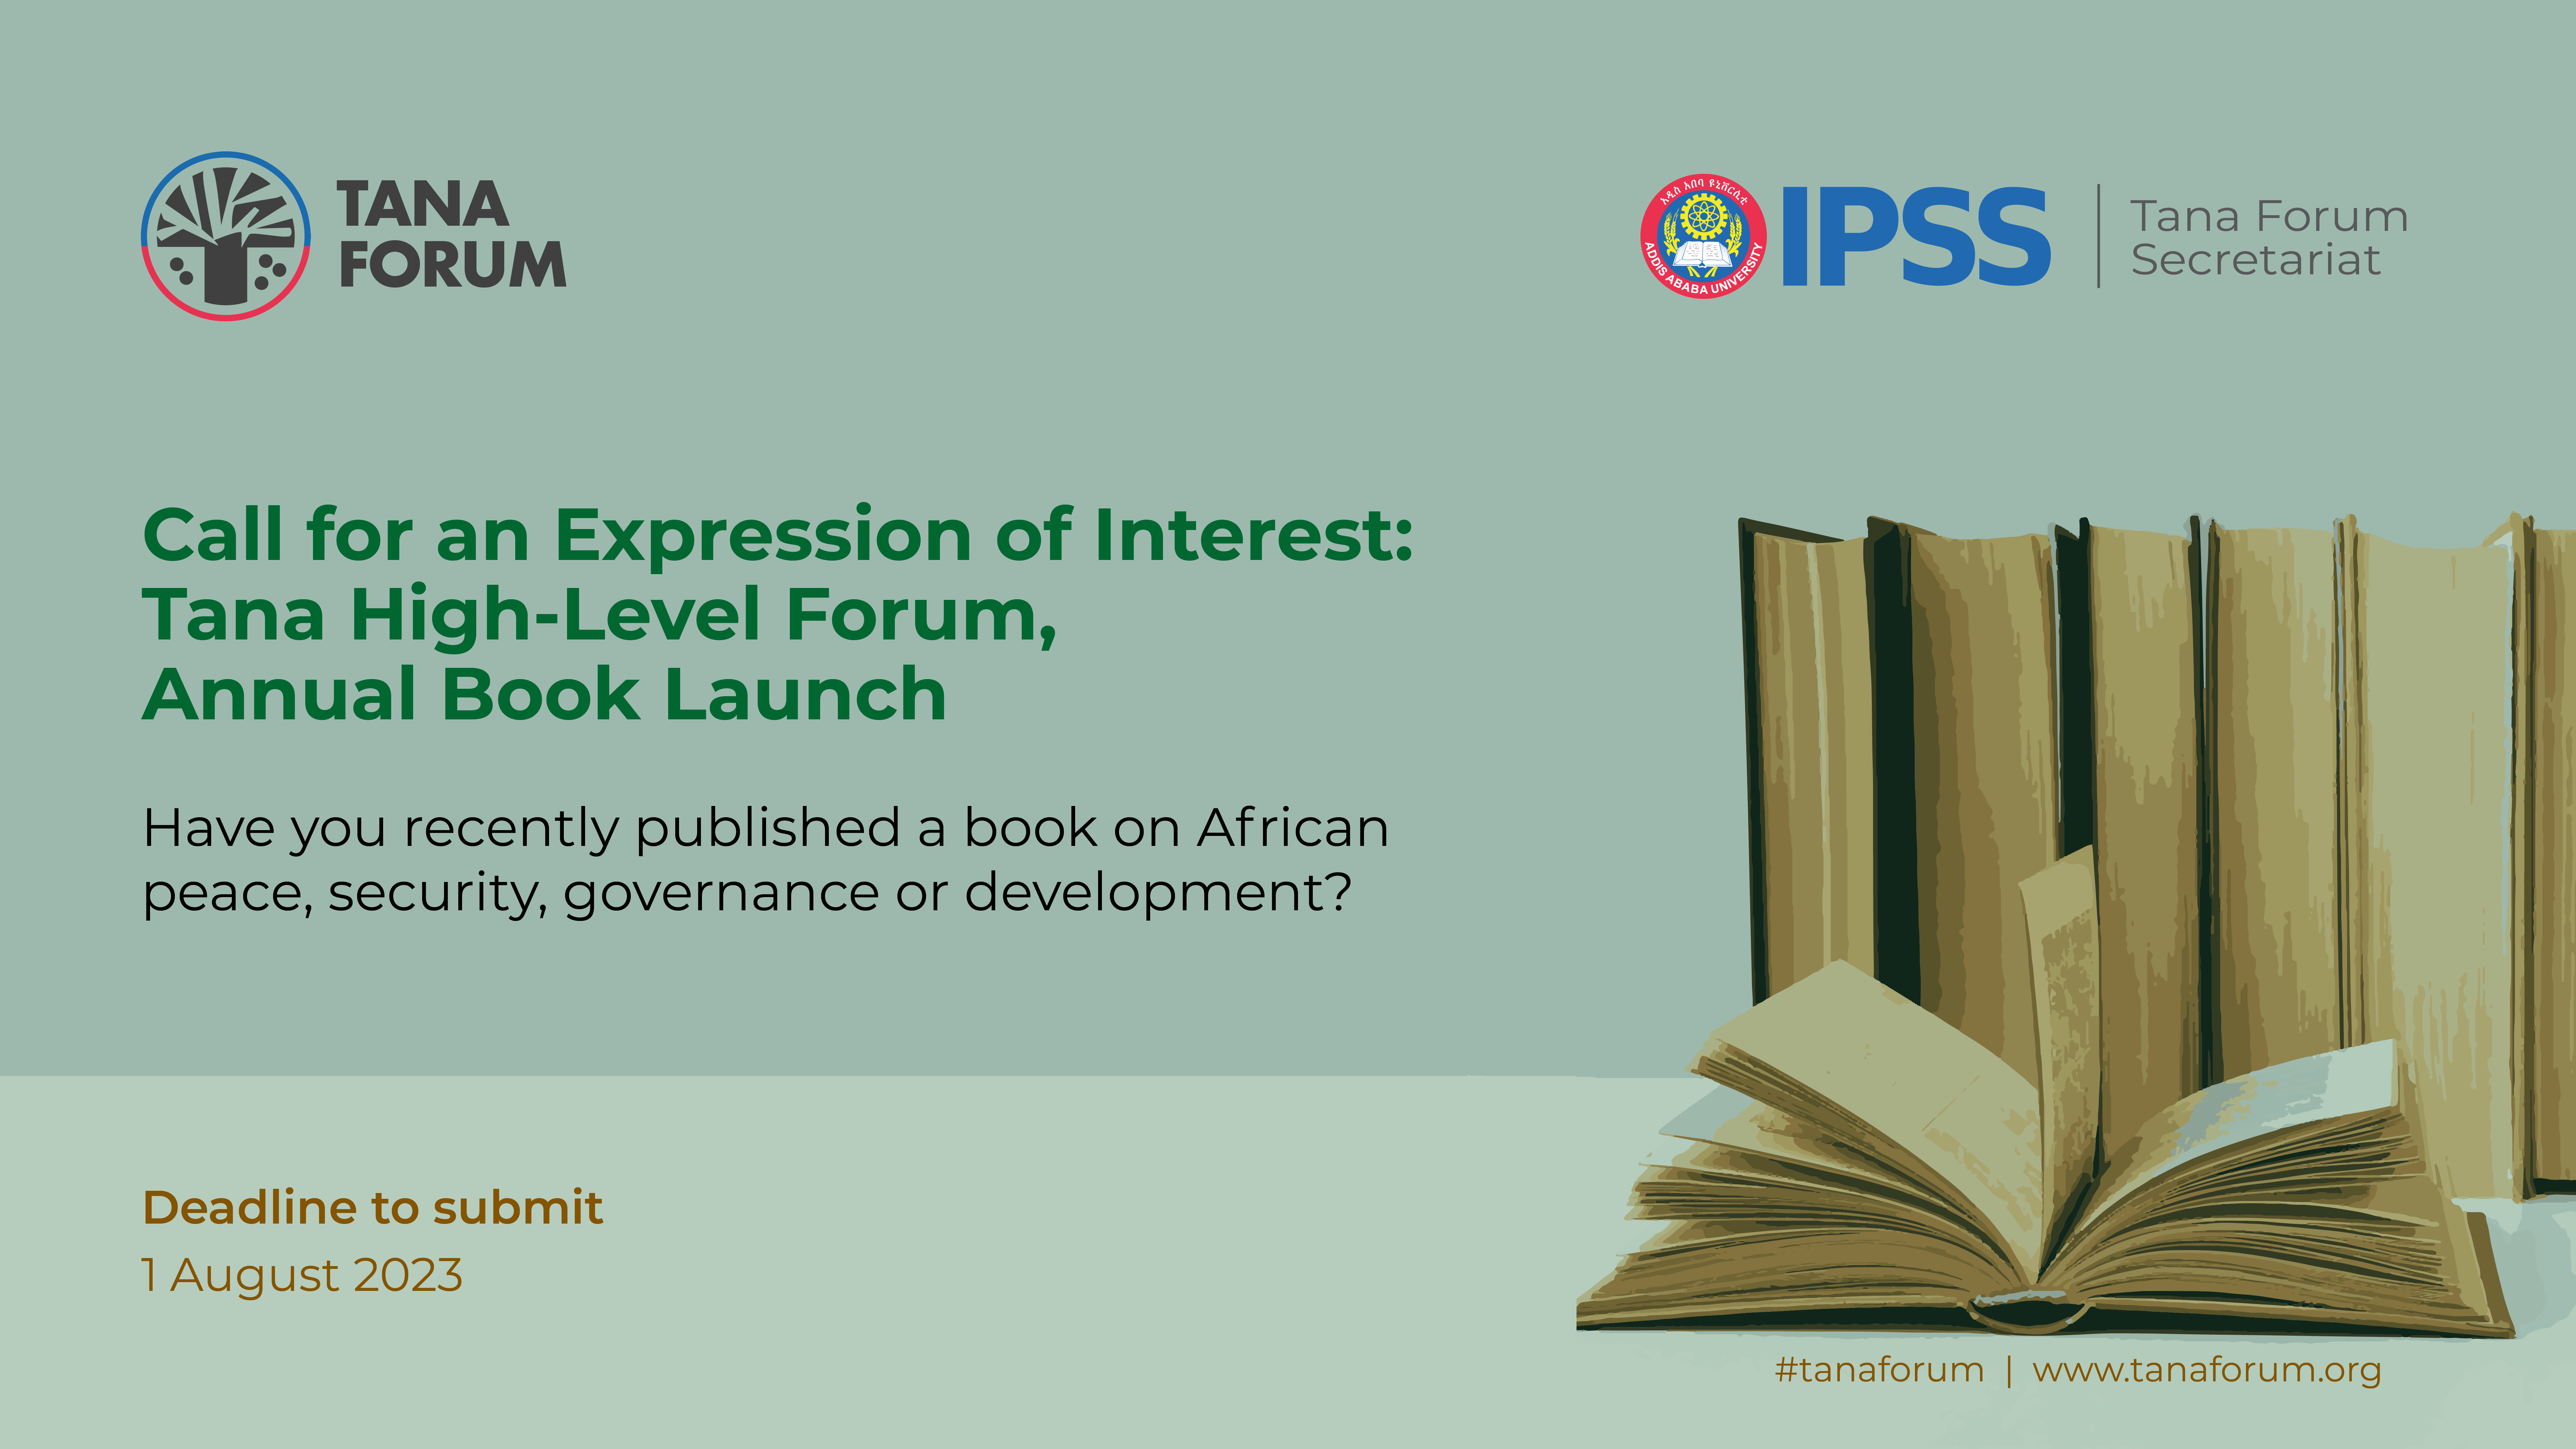 Call for an Expression of Interest: Tana High-Level Forum on Security, Annual Book Launch